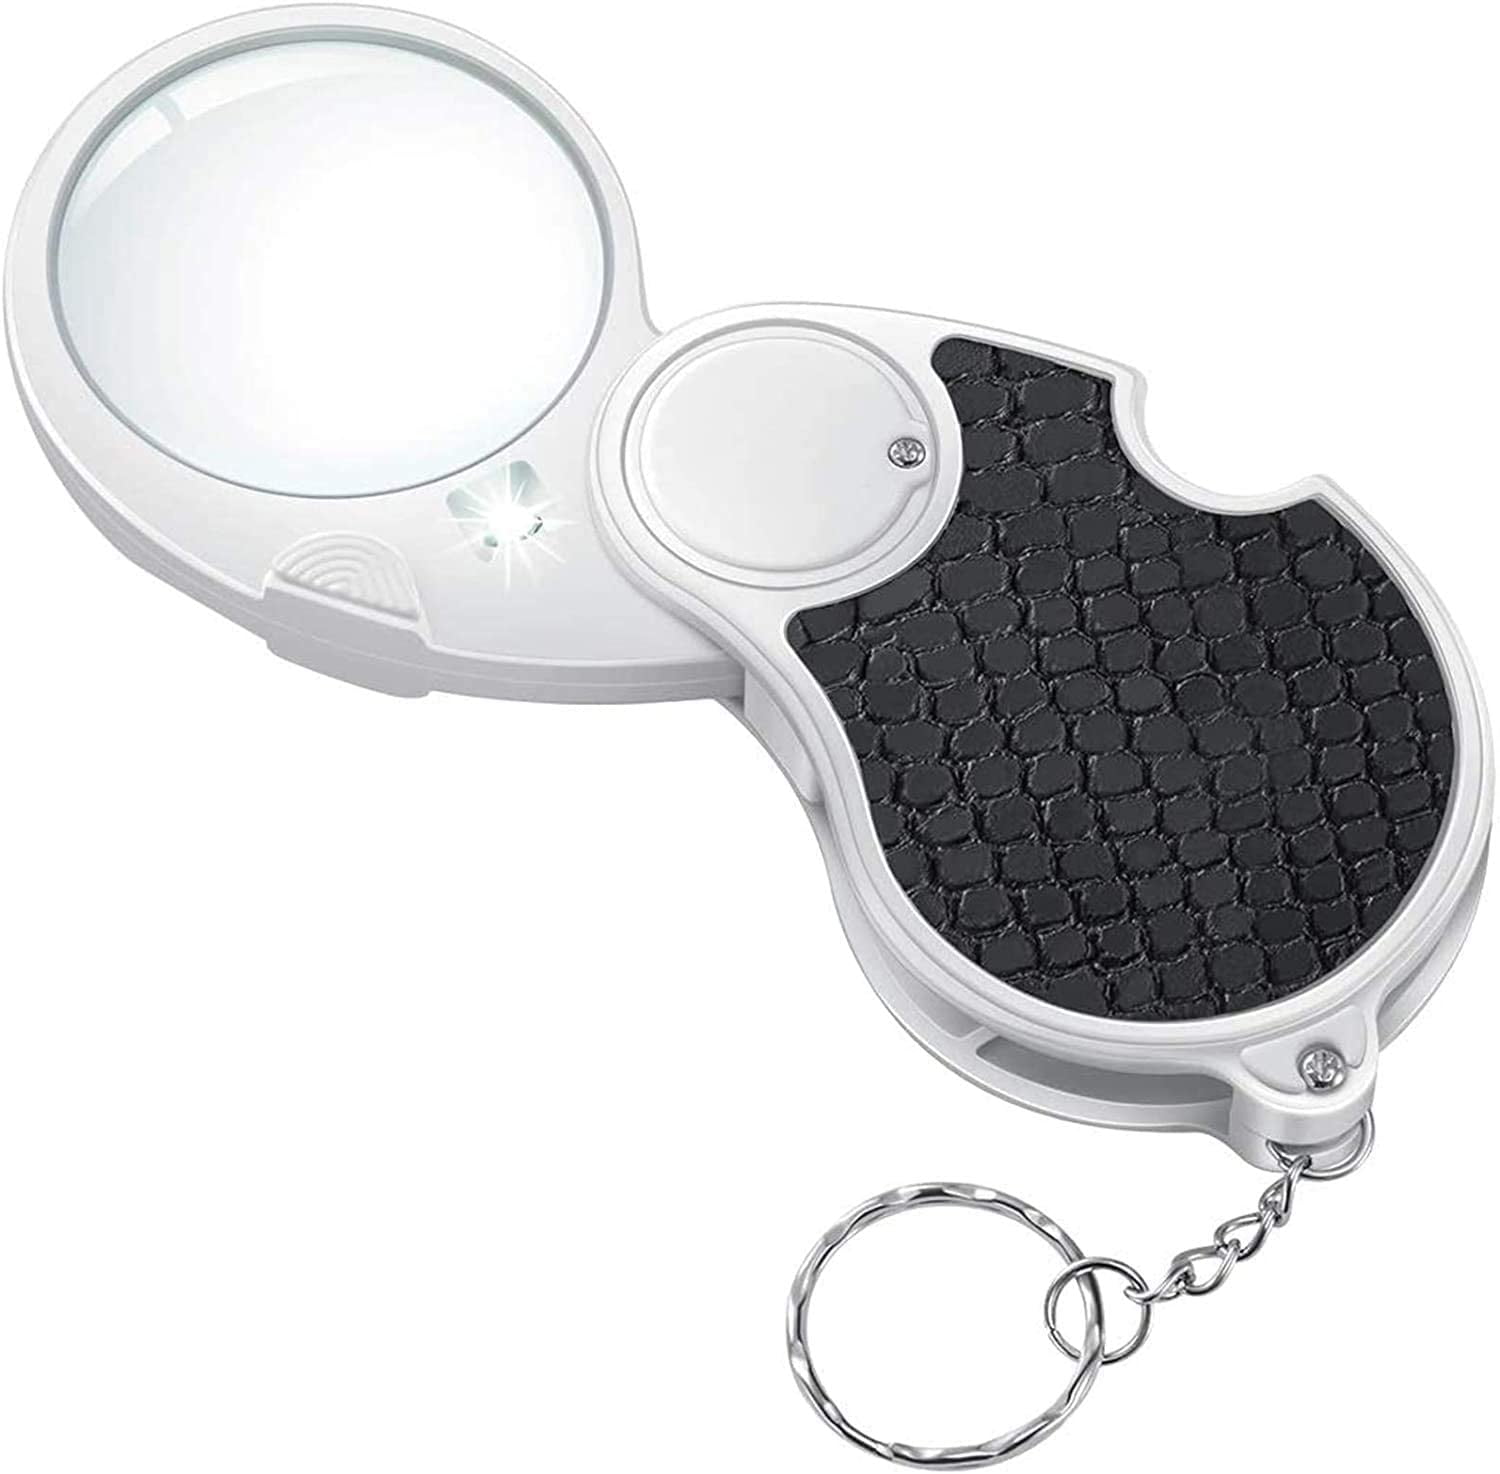 NZQXJXZ 5X Hands Free Magnifying Glass with Neck Wear for Reading Black